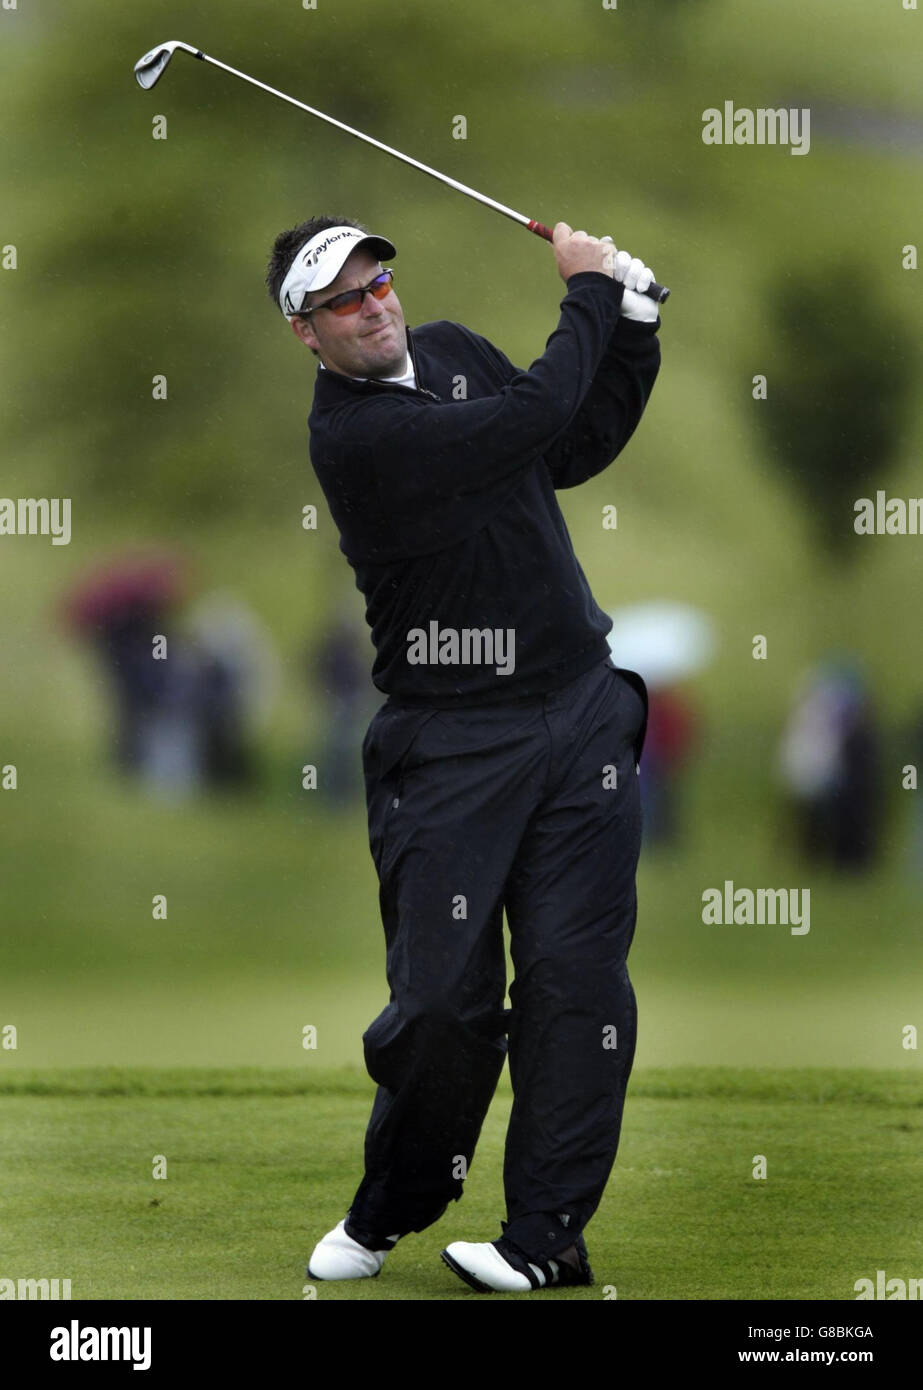 Golf - The Wales Open 2005 - Celtic Manor. England's Kenneth Ferrie on the 12th fairway Stock Photo